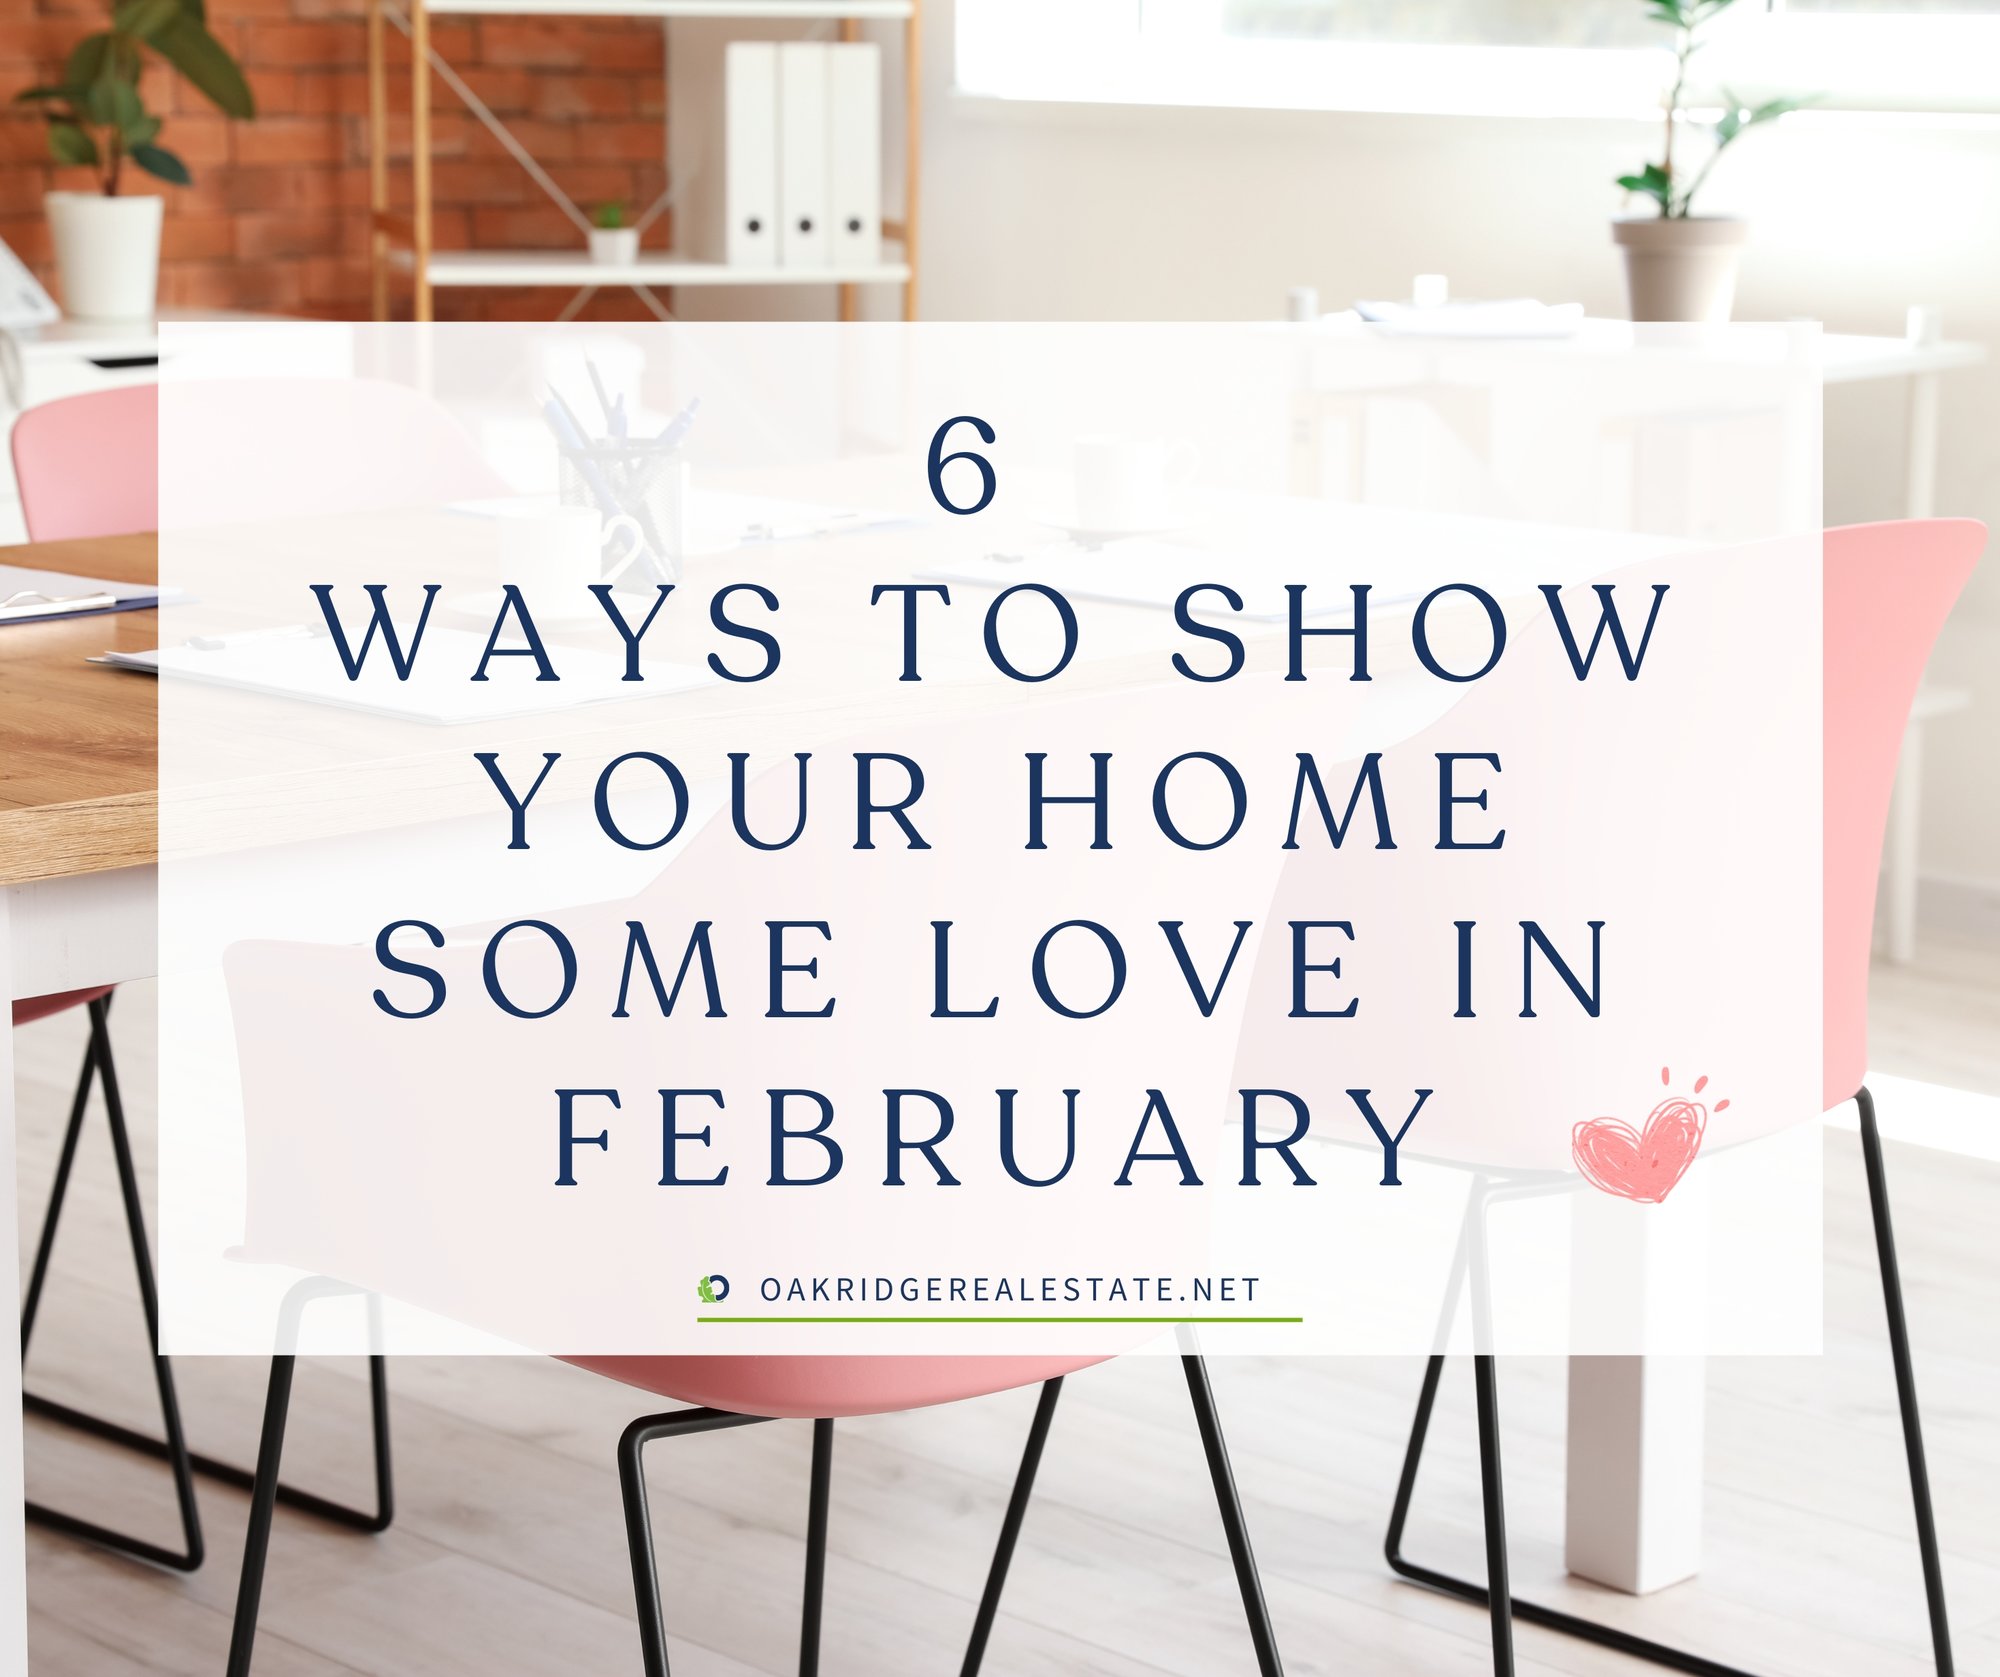 6 Ways to Show Your Home Some Love in February